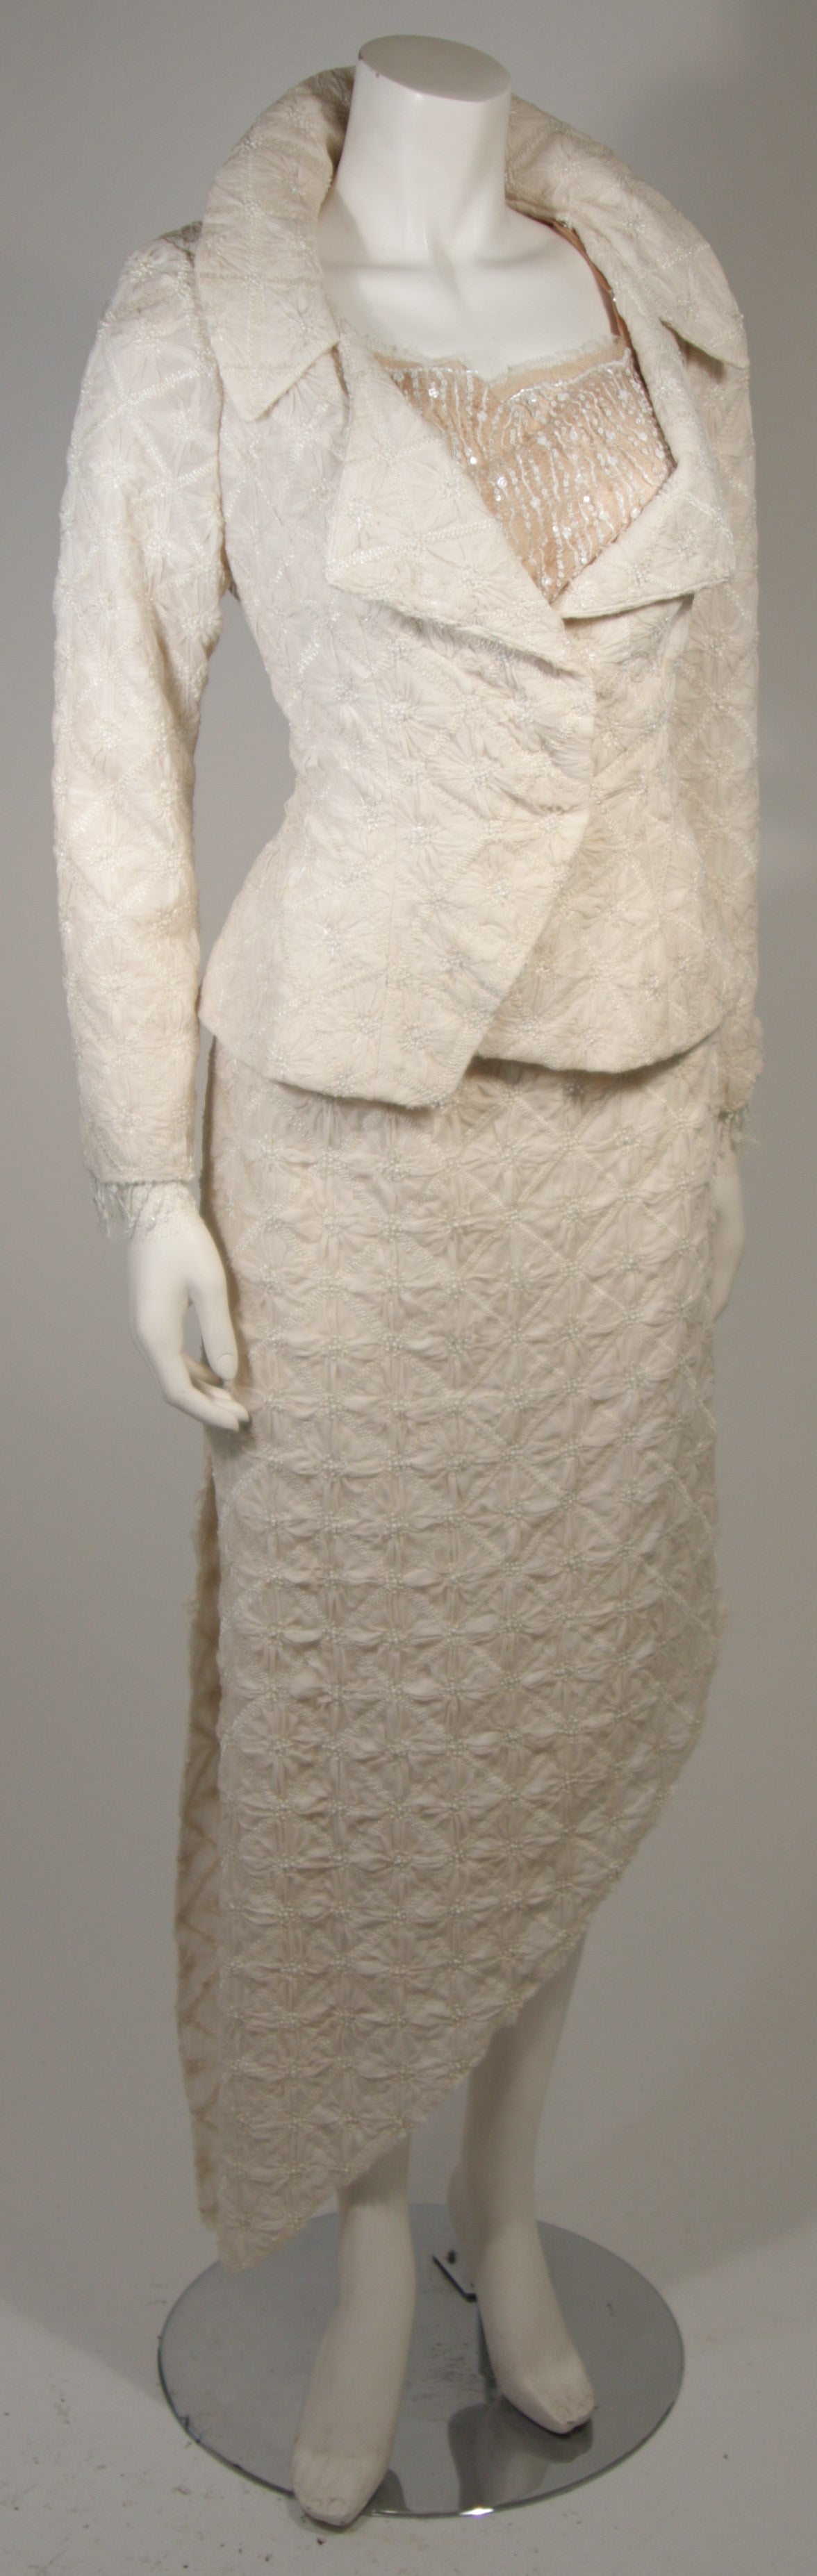 This Nolan Miller attributed ensemble is composed of off white silks and adorned with small pearl embellishments. The jacket features a large collar and a flare at the waist, there are center front snap closures. The skirt has an asymmetrical design